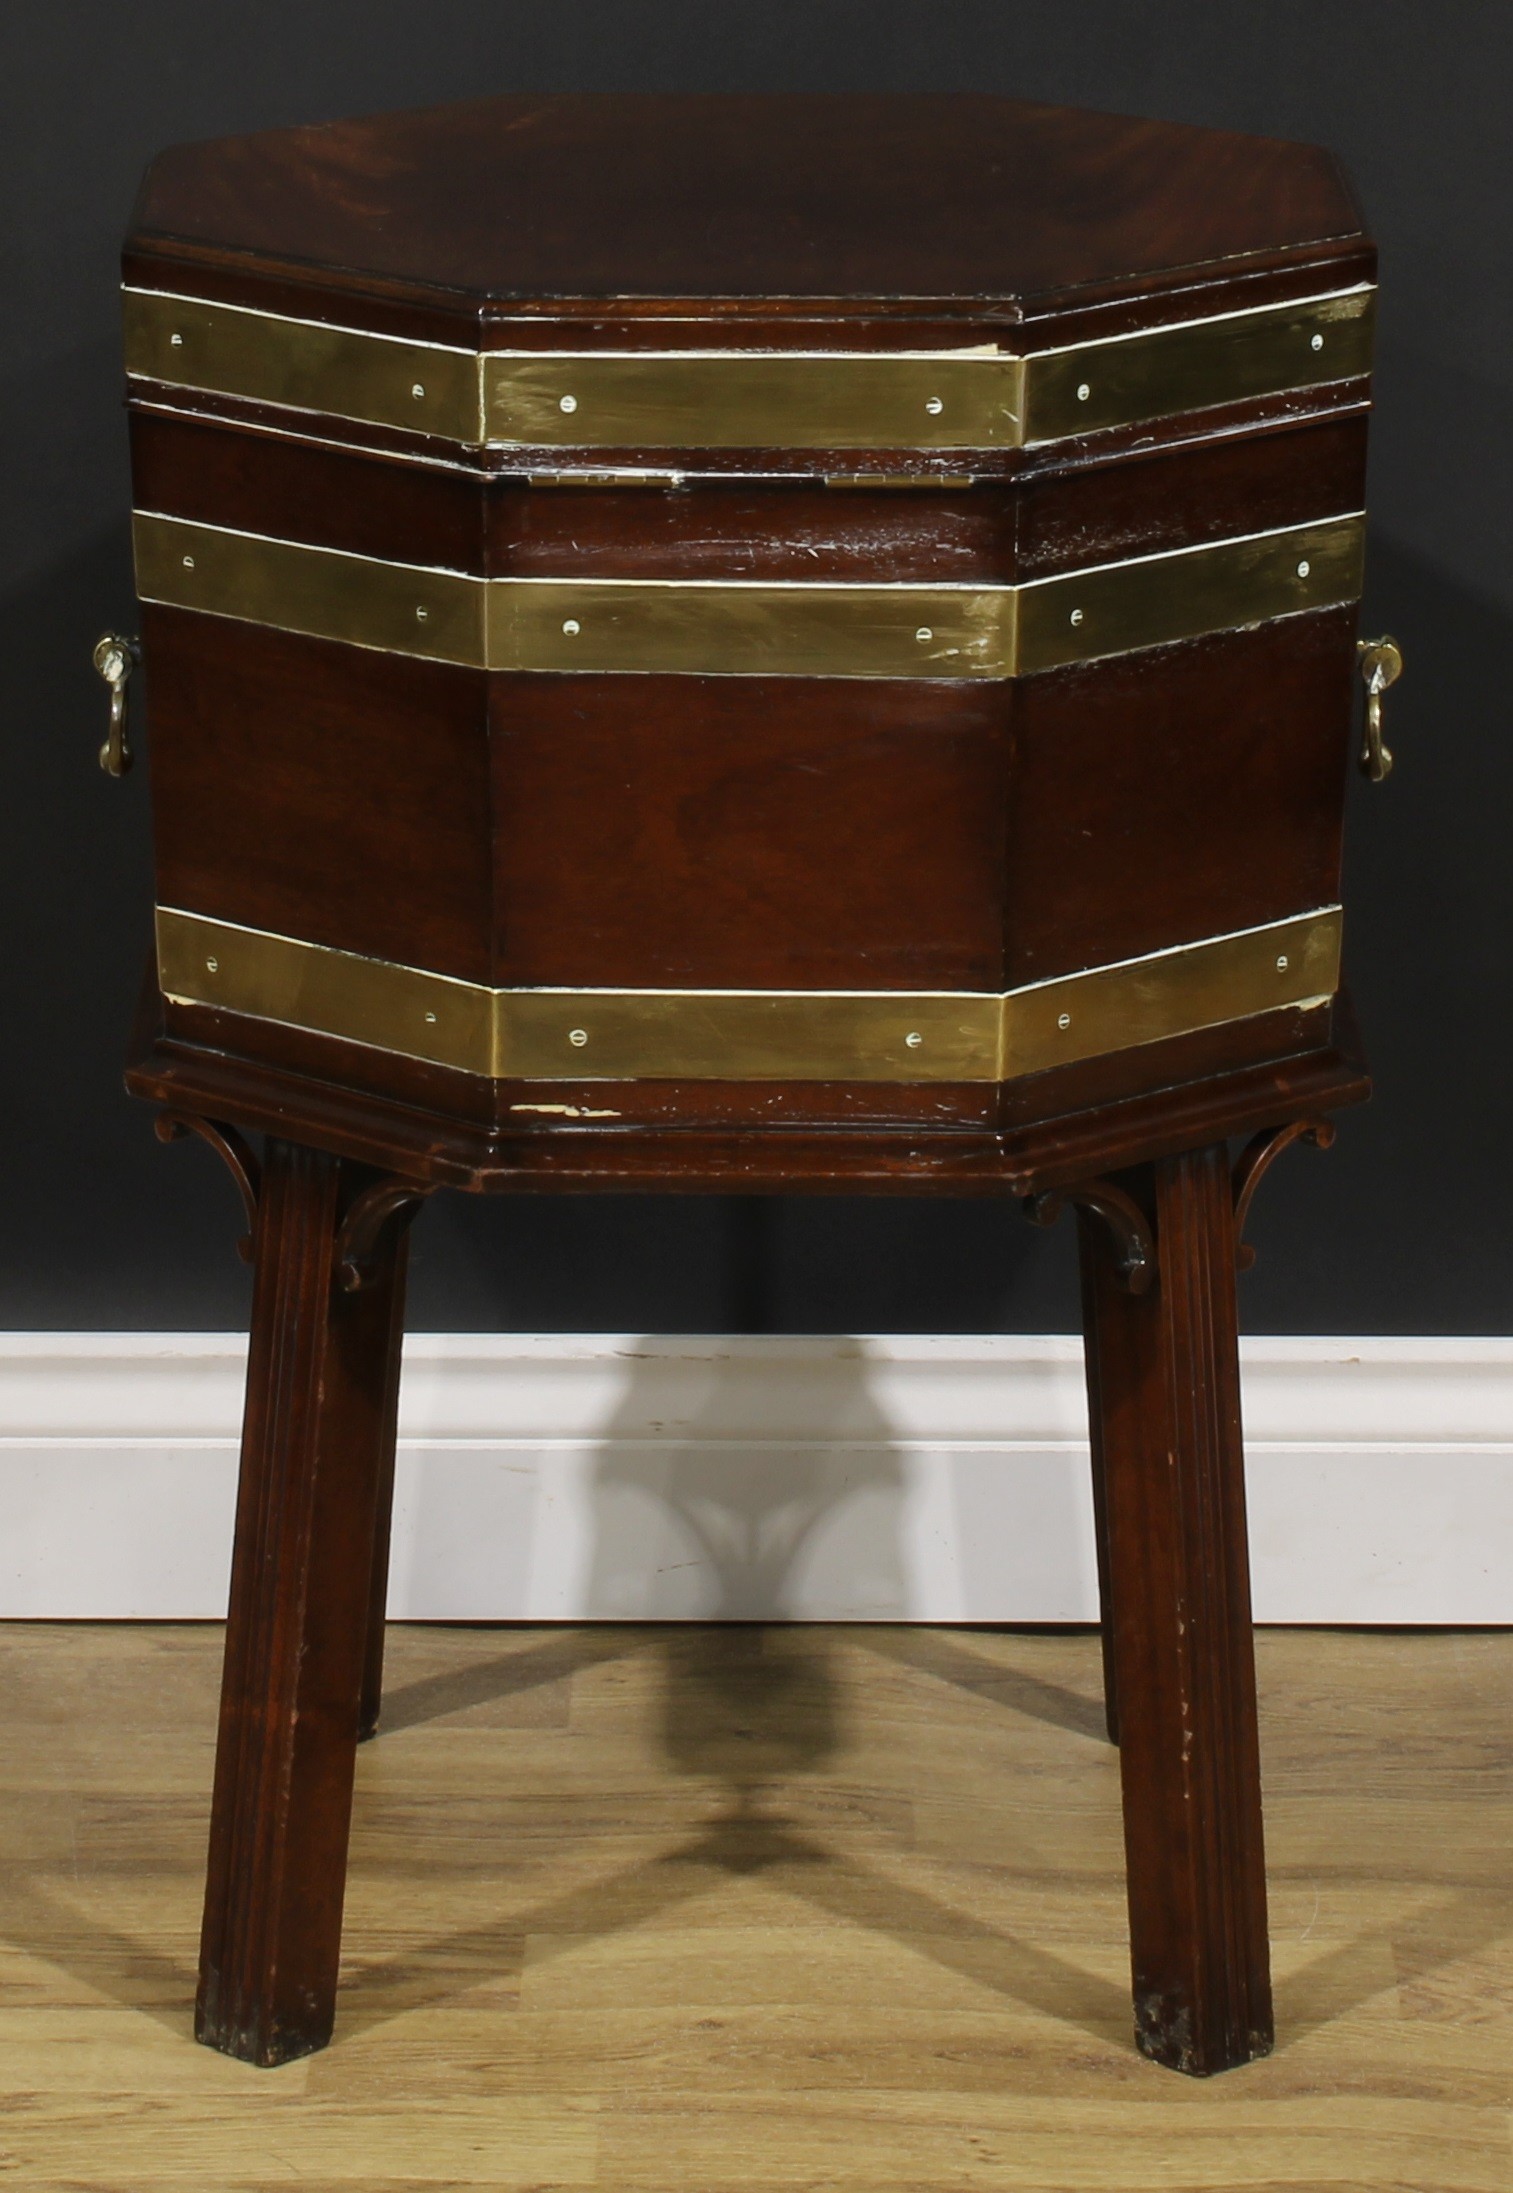 A George III Revival brass-bound mahogany octagonal cellarette or wine cooler, hinged top, removable - Image 6 of 6